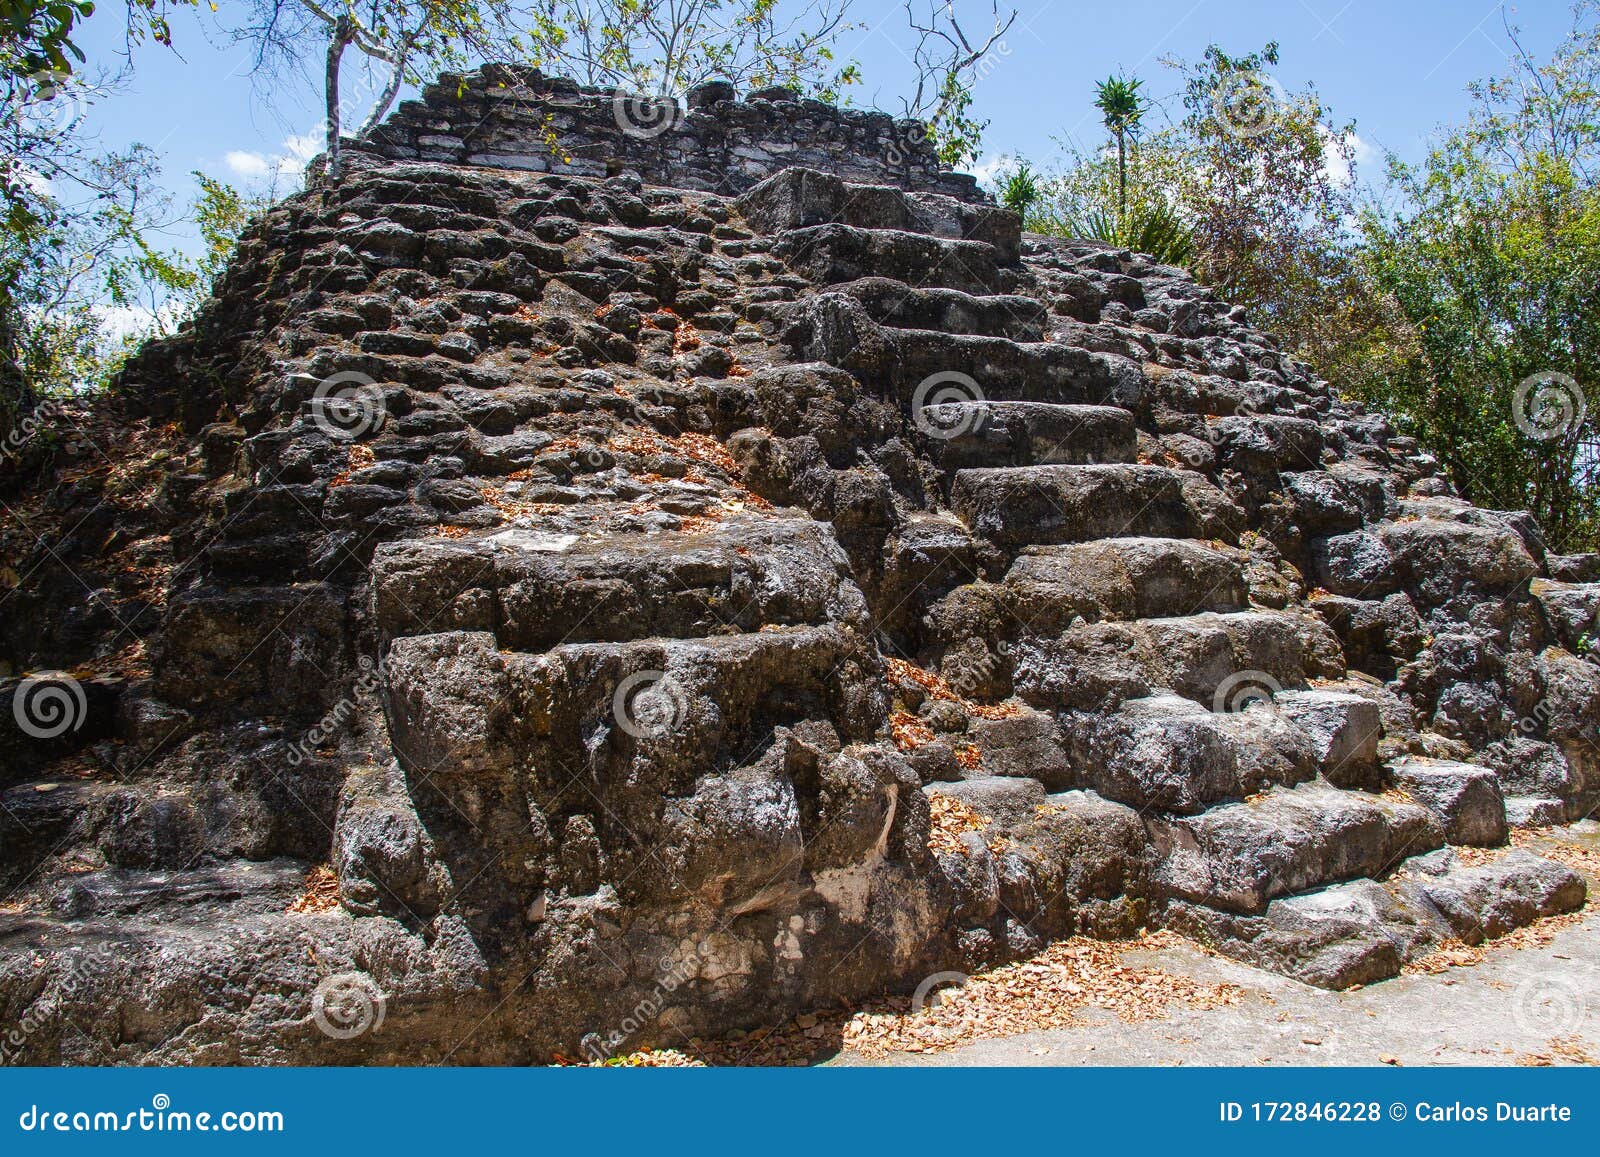 archaeological site: el mirador, the cradle of mayan civilization and the oldest mayan city in history